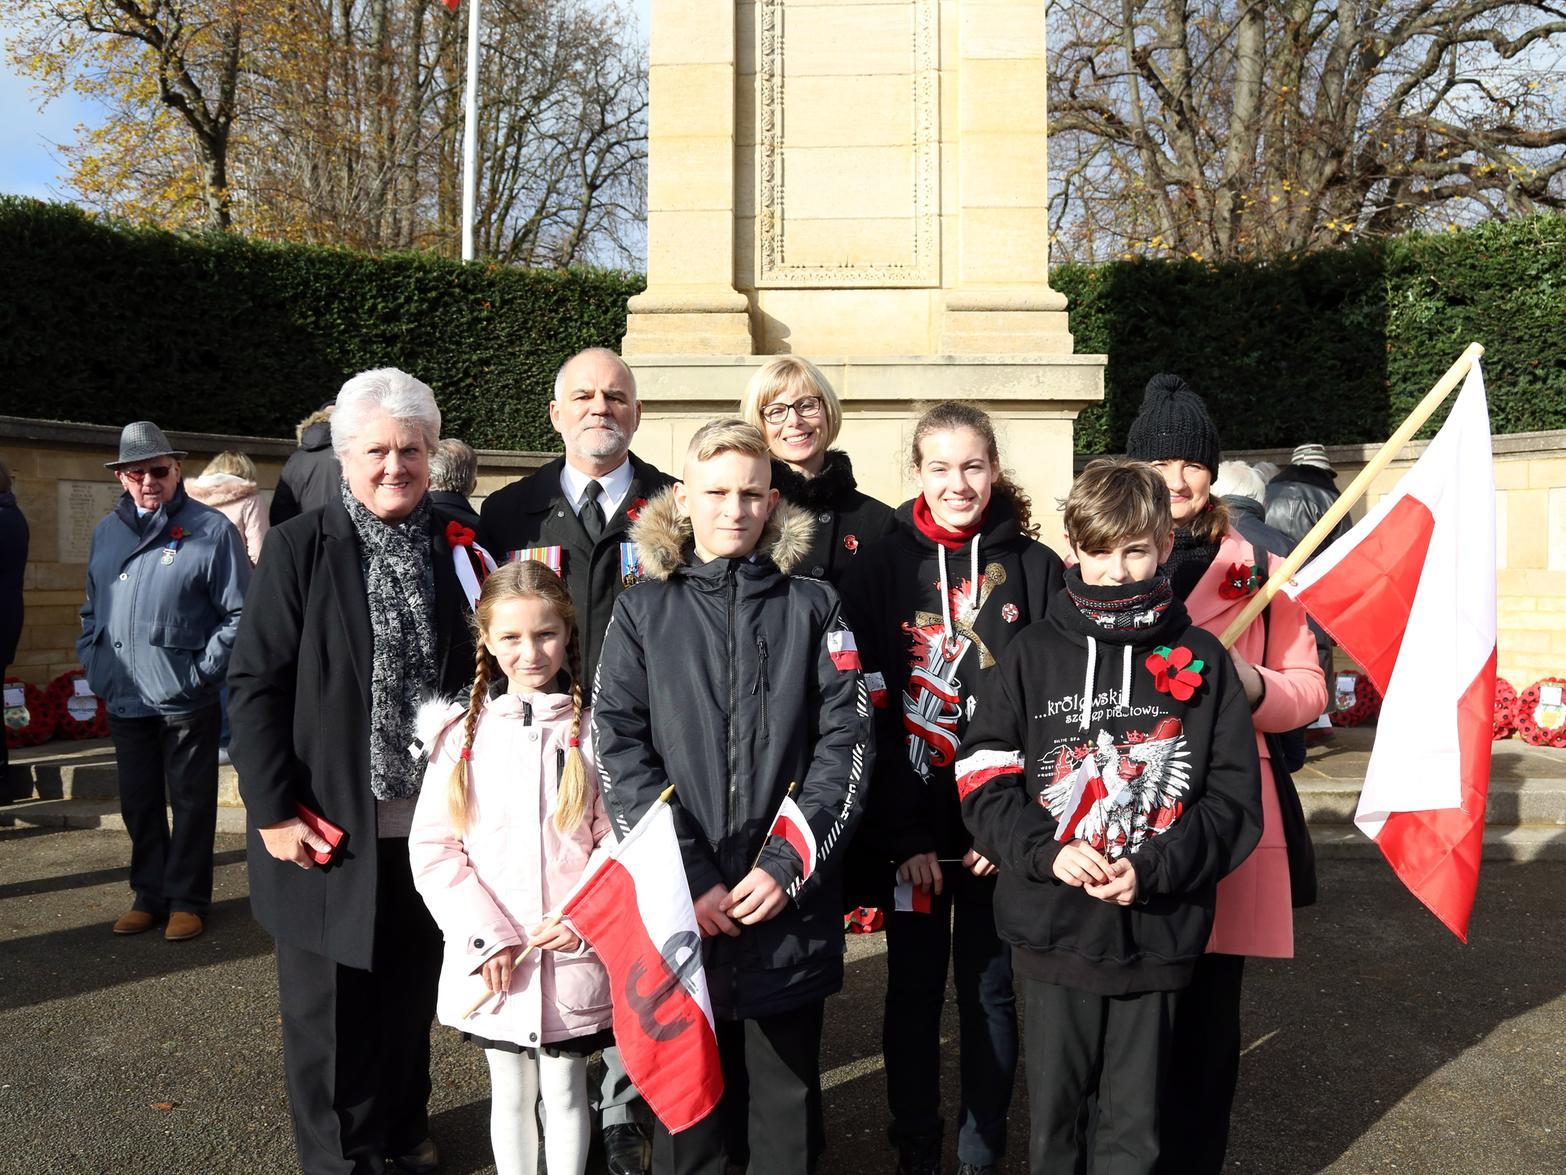 Members of the Polish community were invited to lay a wreath and lead the prayers